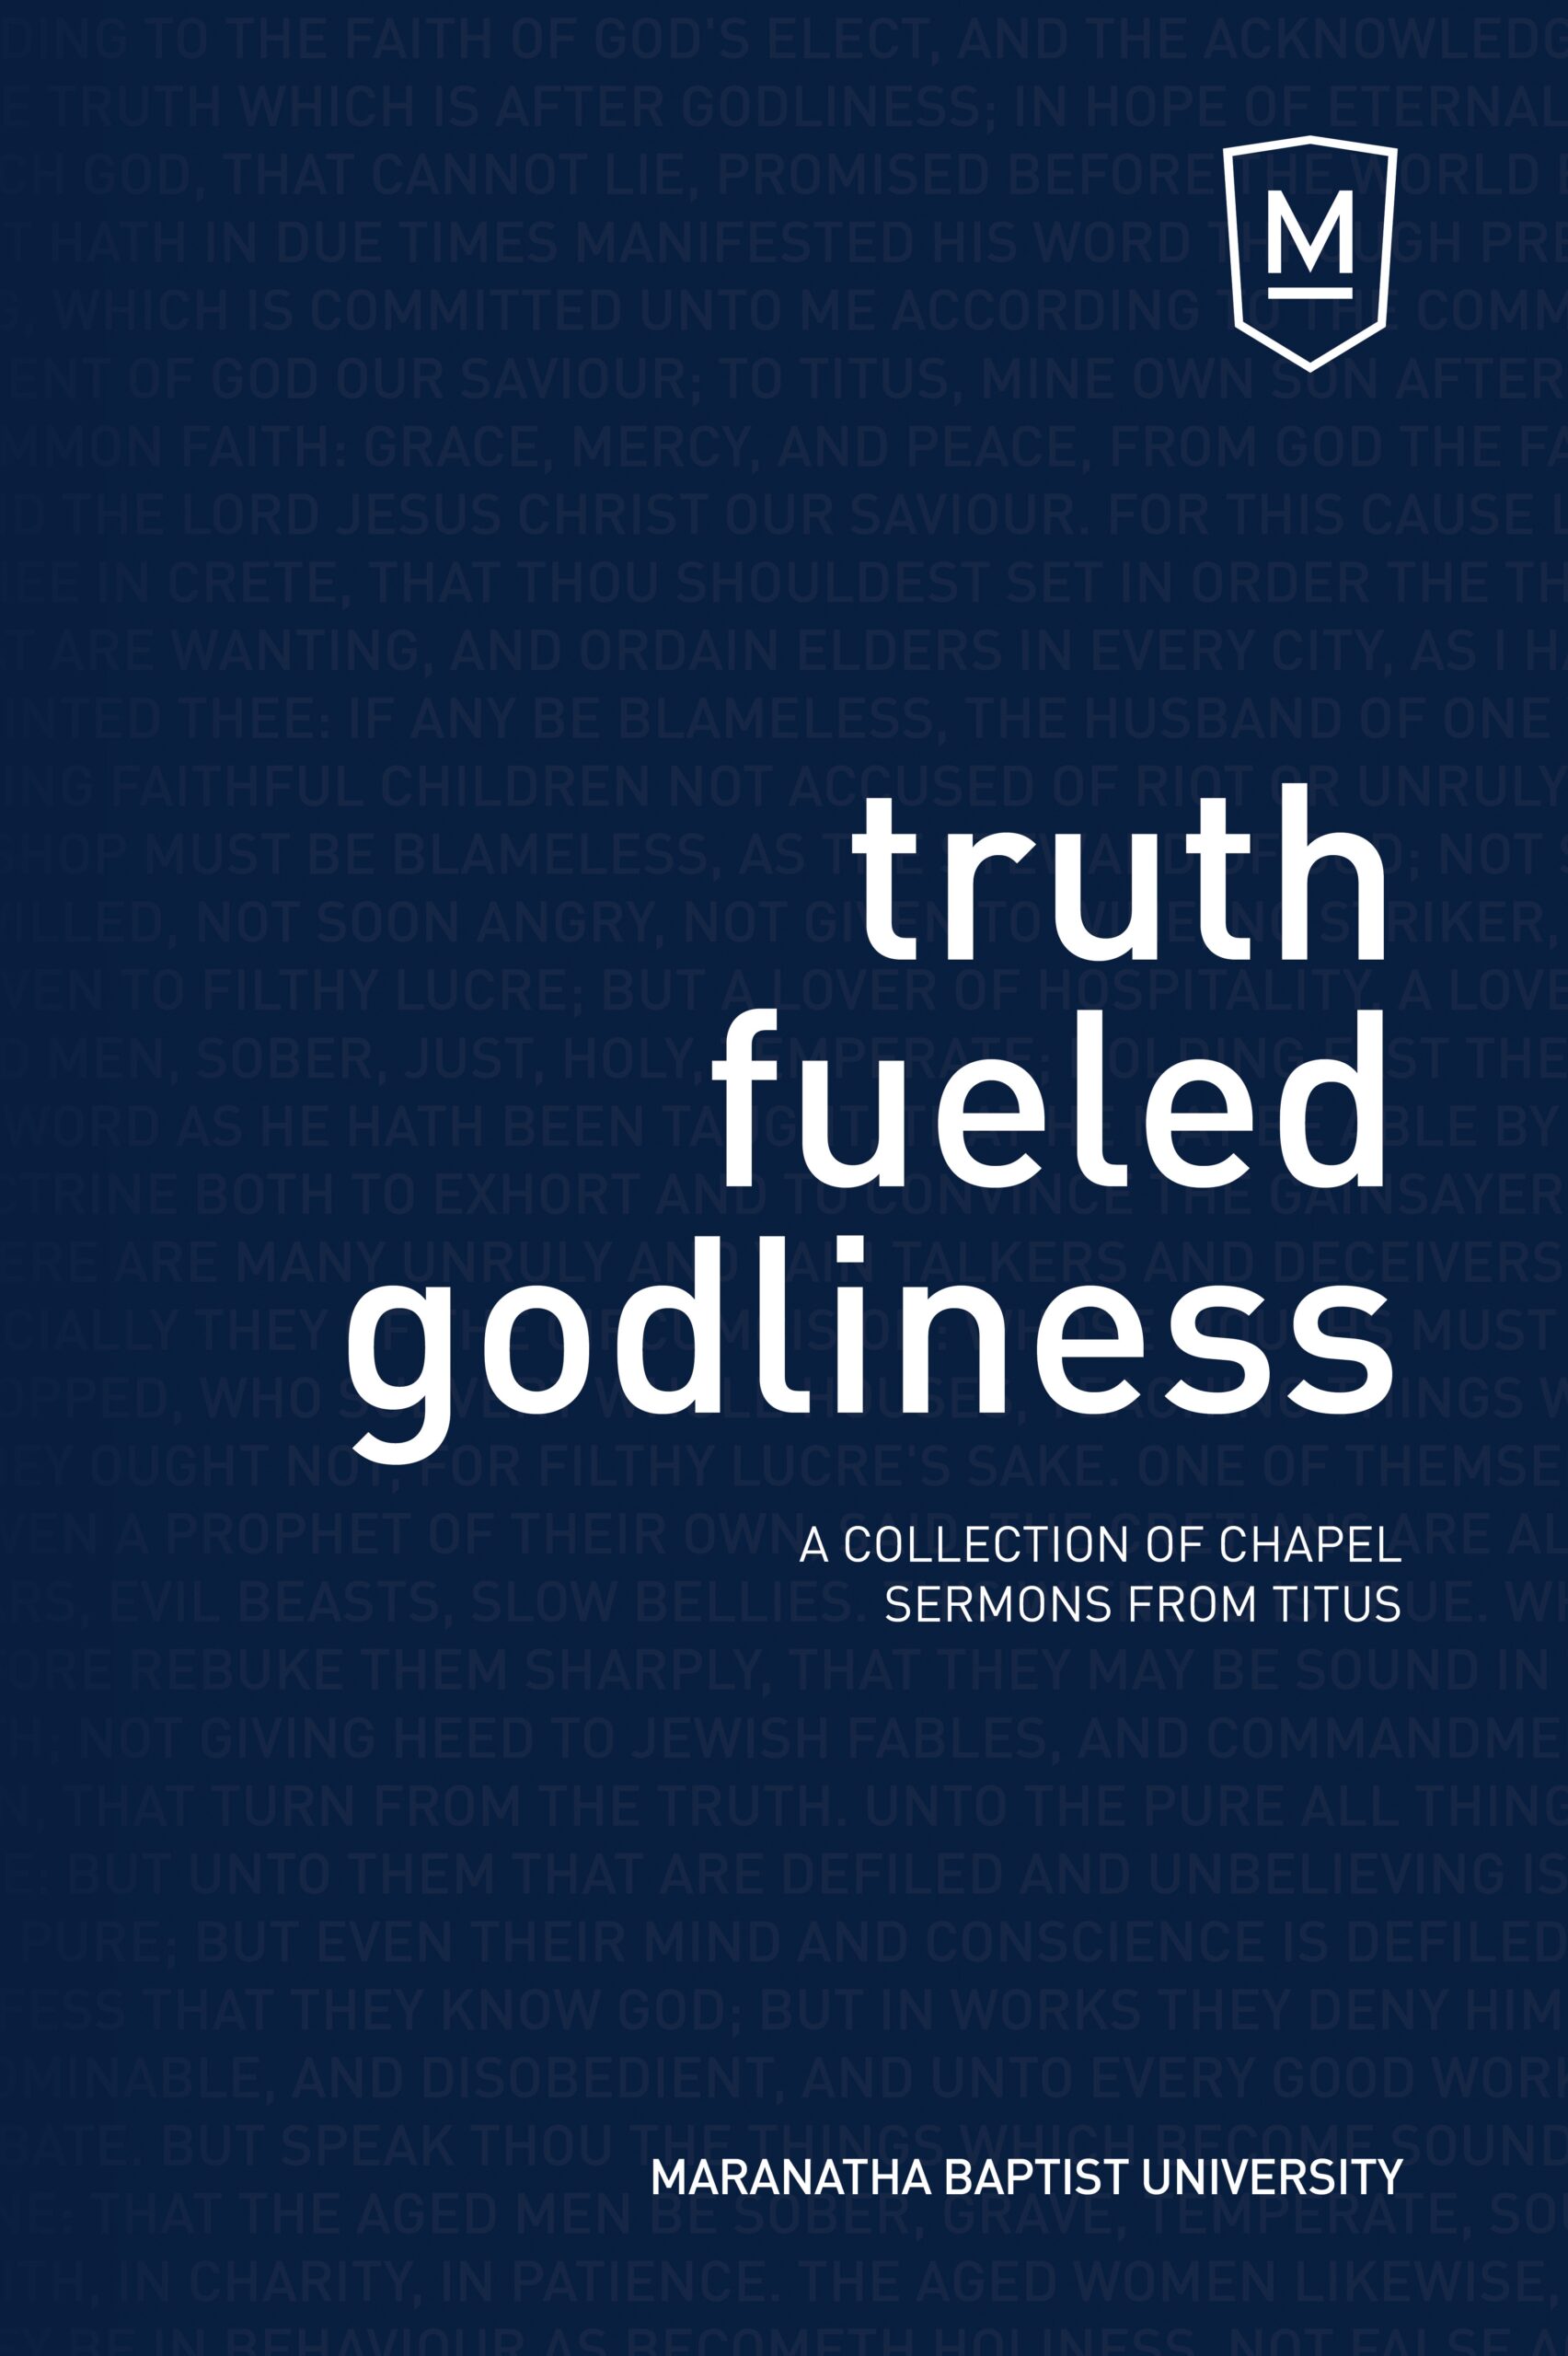 chapel sermons collection: truth fueled goldiness